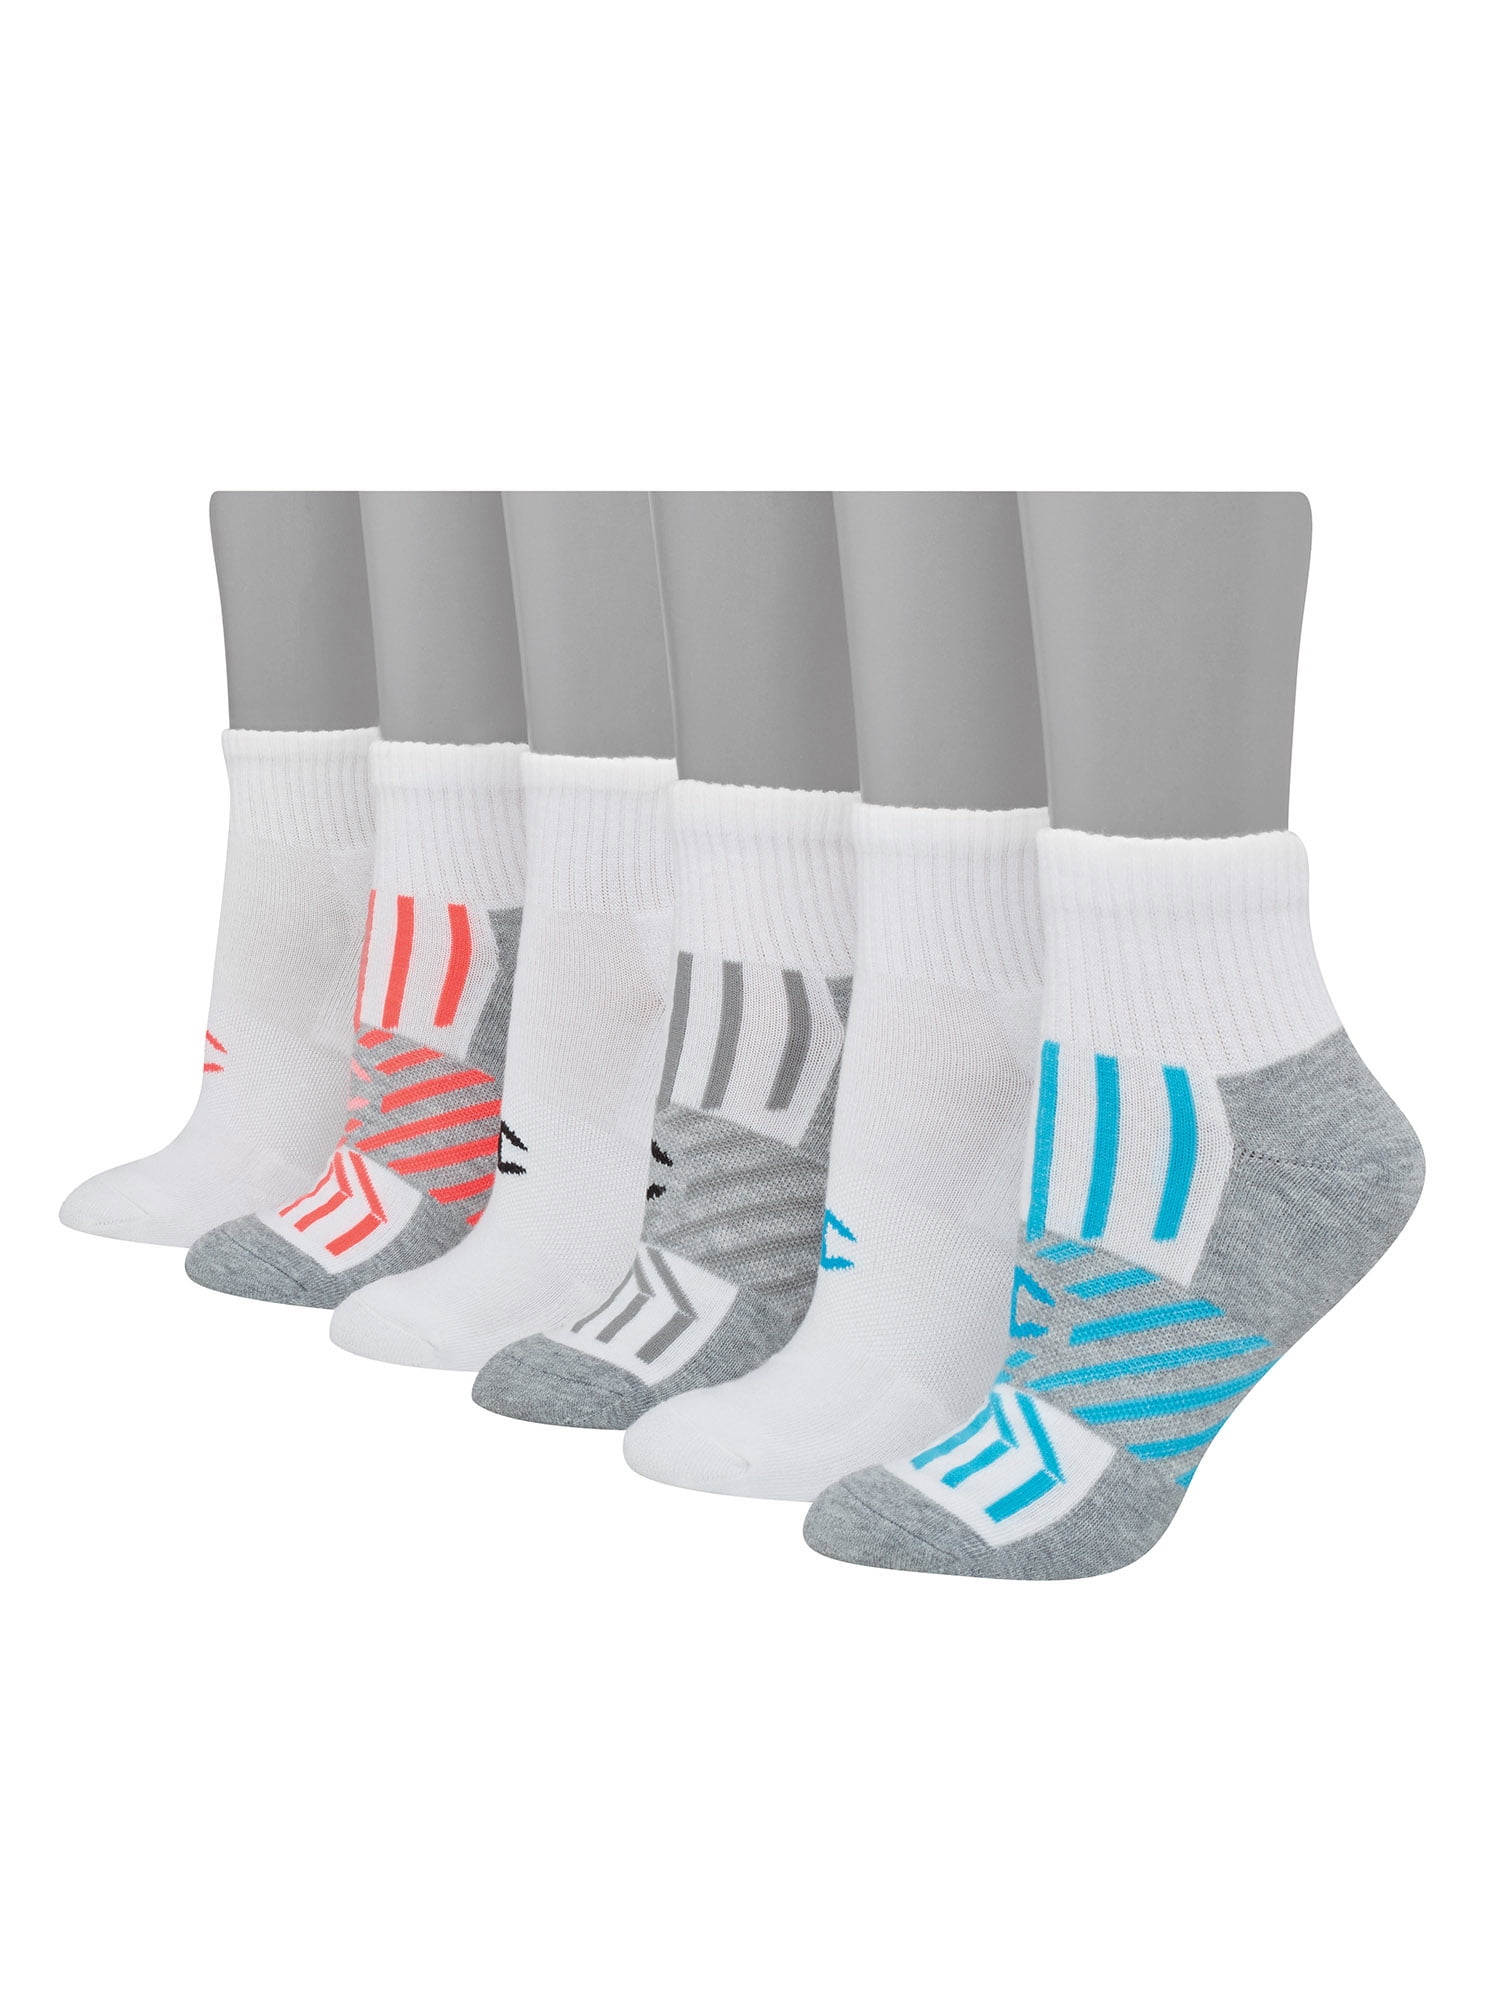 6 Pairs Cotton Ankle Socks 9-11 White with Pink H/T Women's Sports M HEAVY crew 